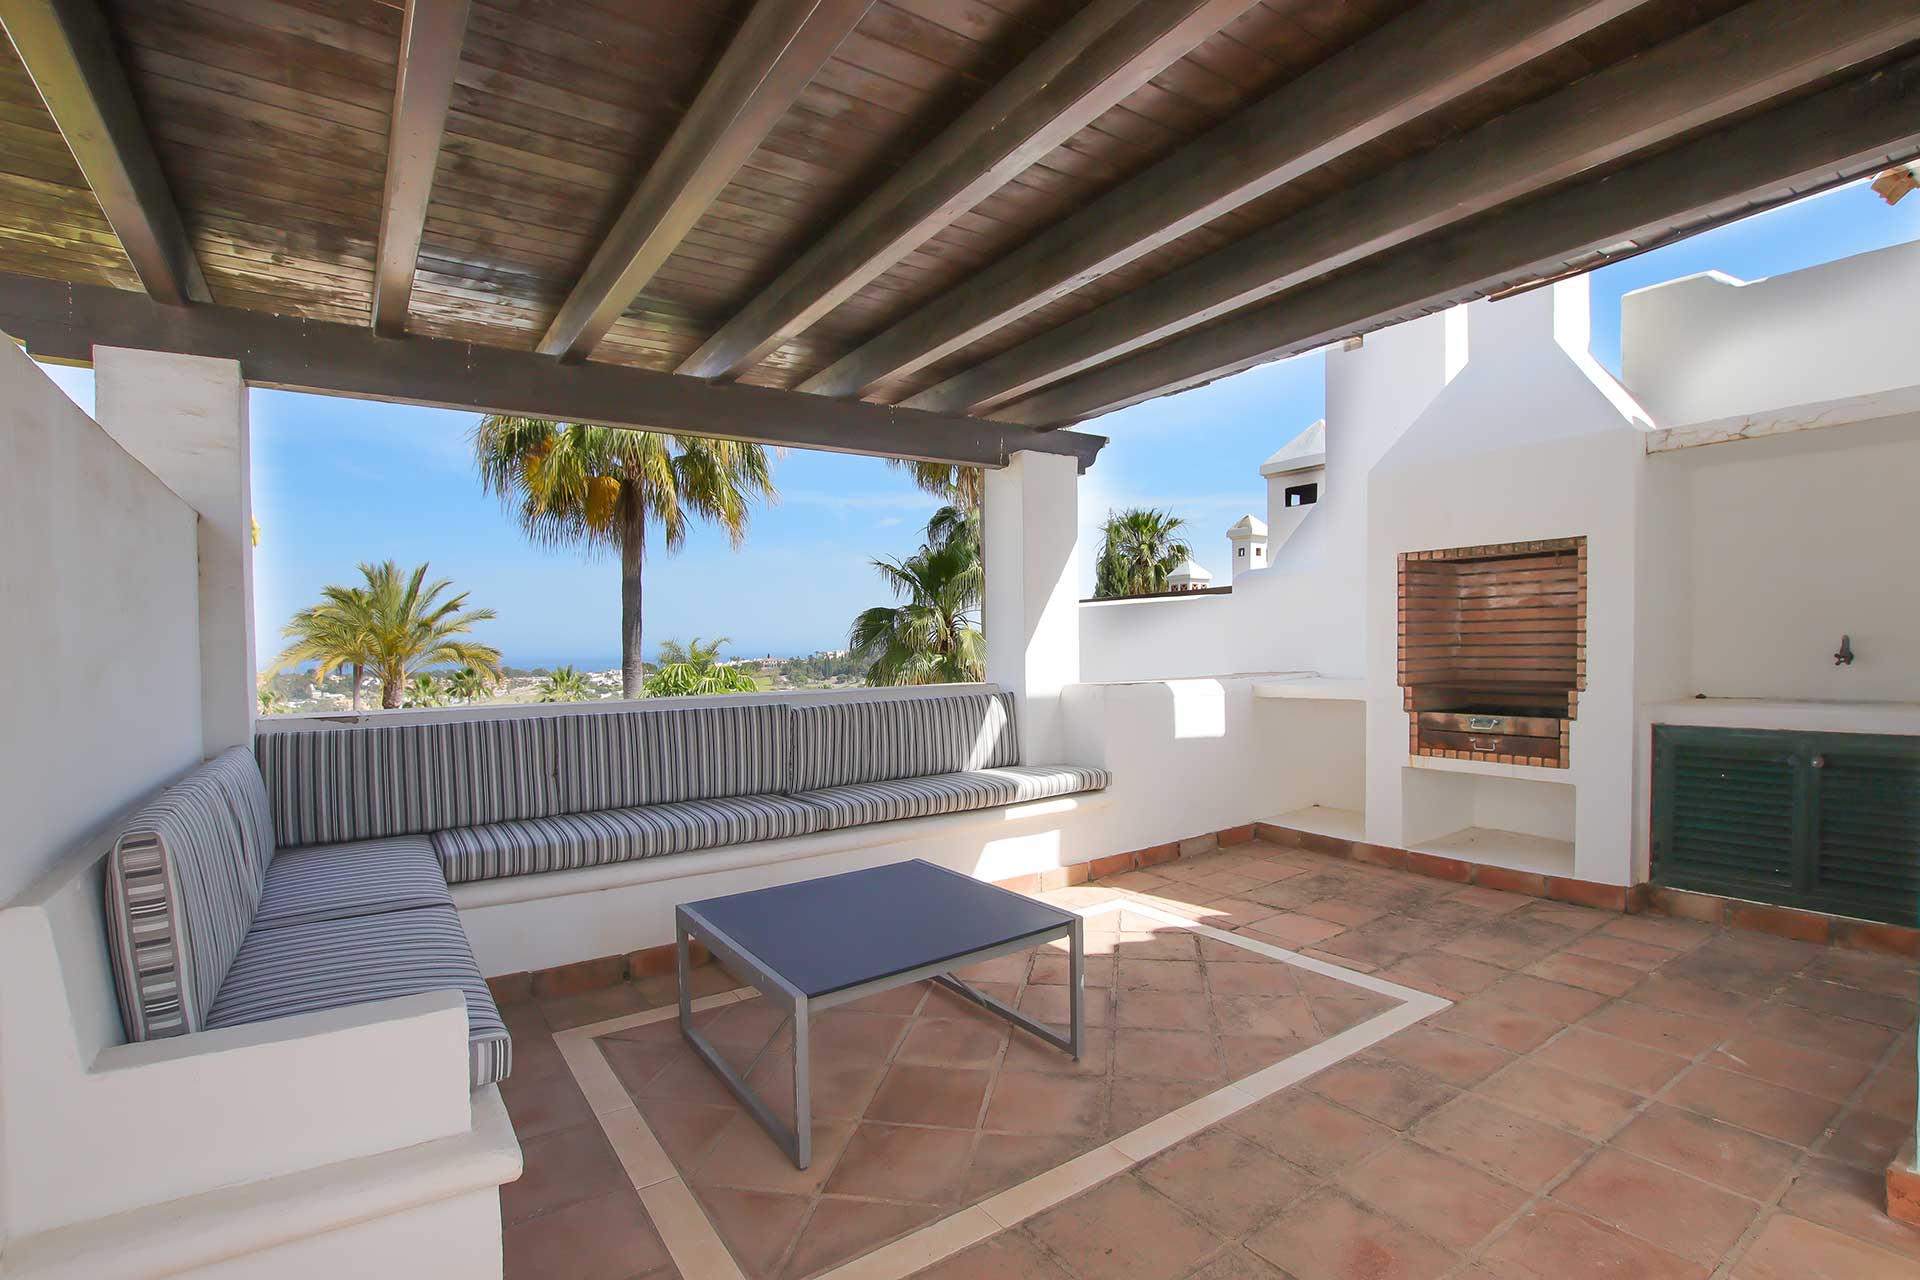 Roof terrace offers unparalleled panoramic views of the surrounding landscape, including the lush communal gardens, the sparkling swimming pool, and the glistening Mediterranean Sea.